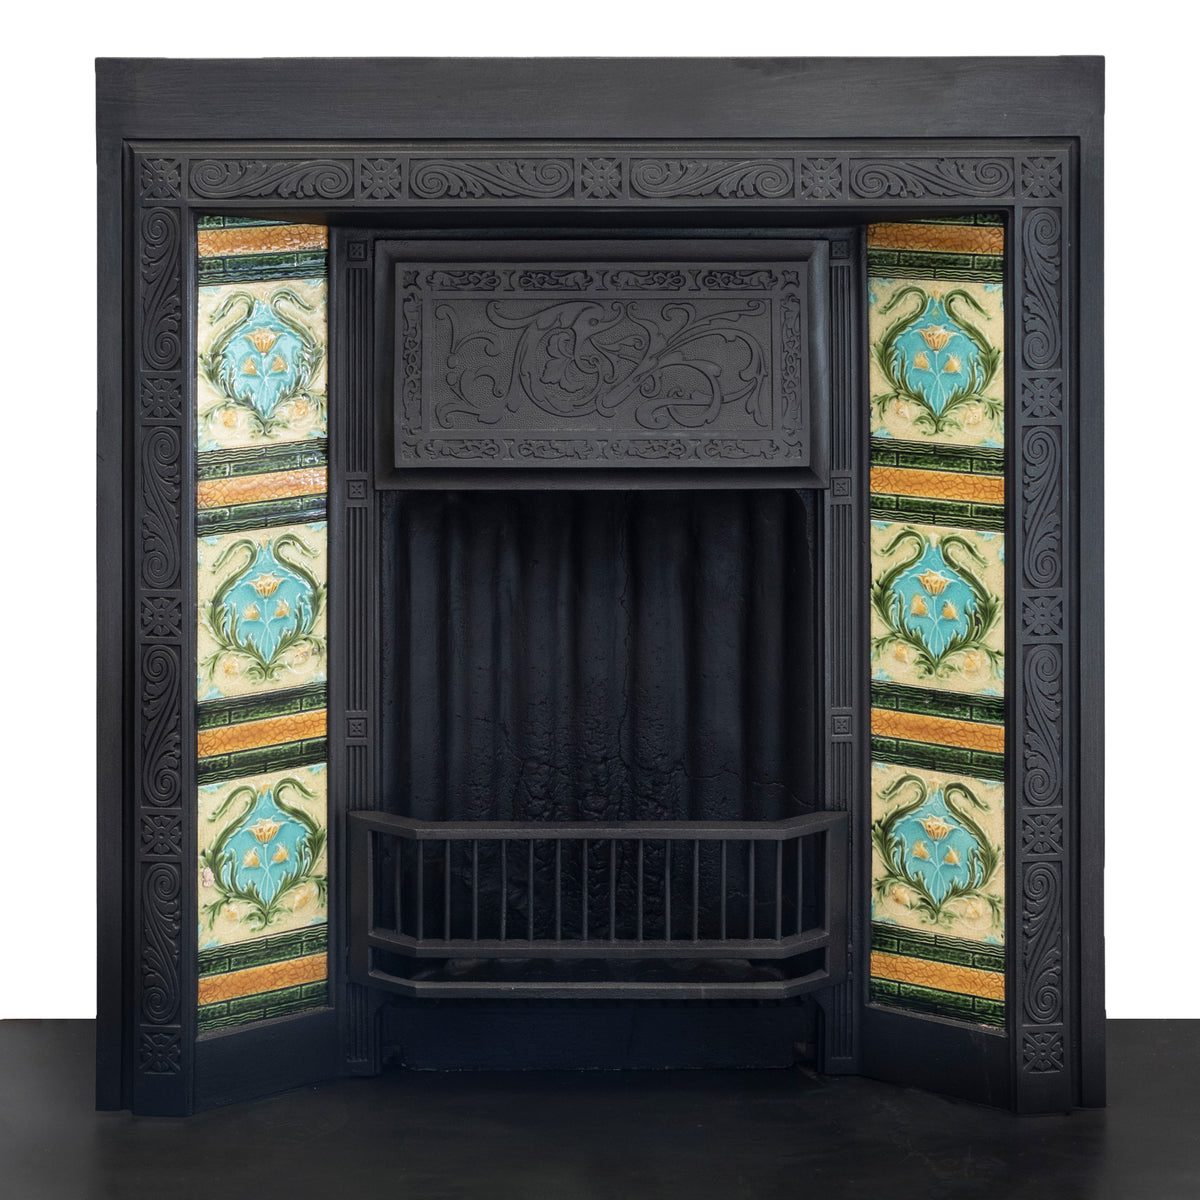 Antique Cast iron Fireplace Insert with Green &amp; Blue Tiles | The Architectural Forum